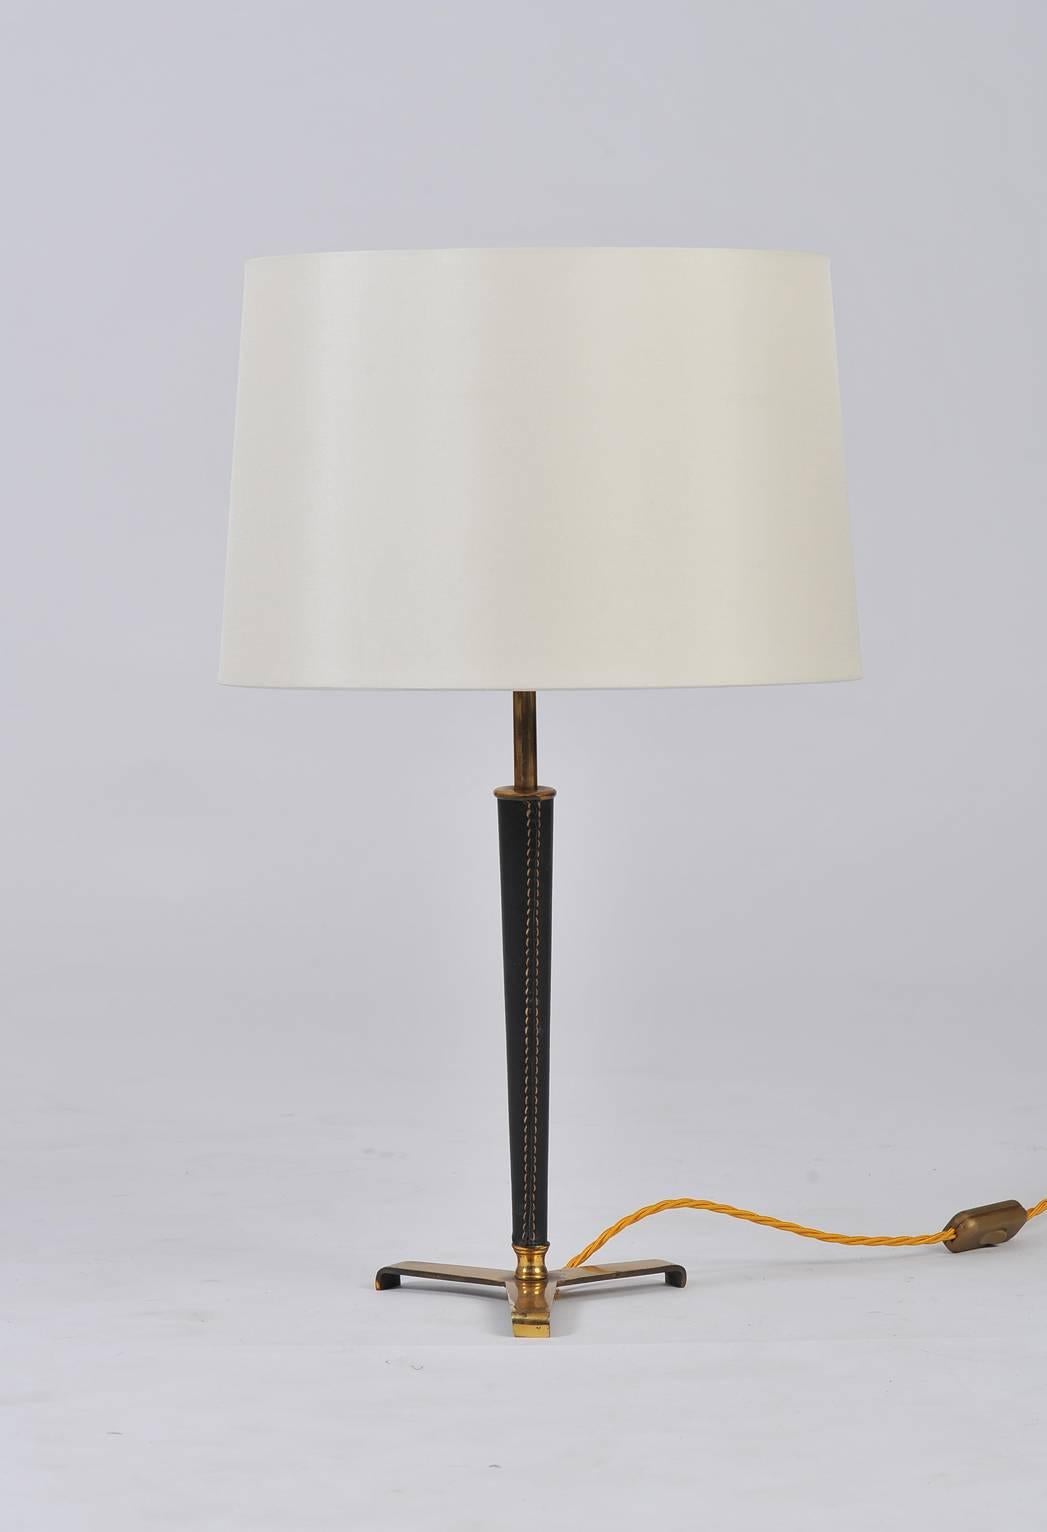 A brass and stitched black leather lamp, in the manner of Jacques Adnet, topped with an ivory silk tapered shade.
France, circa 1950

(Dimensions inclusive of the shade).